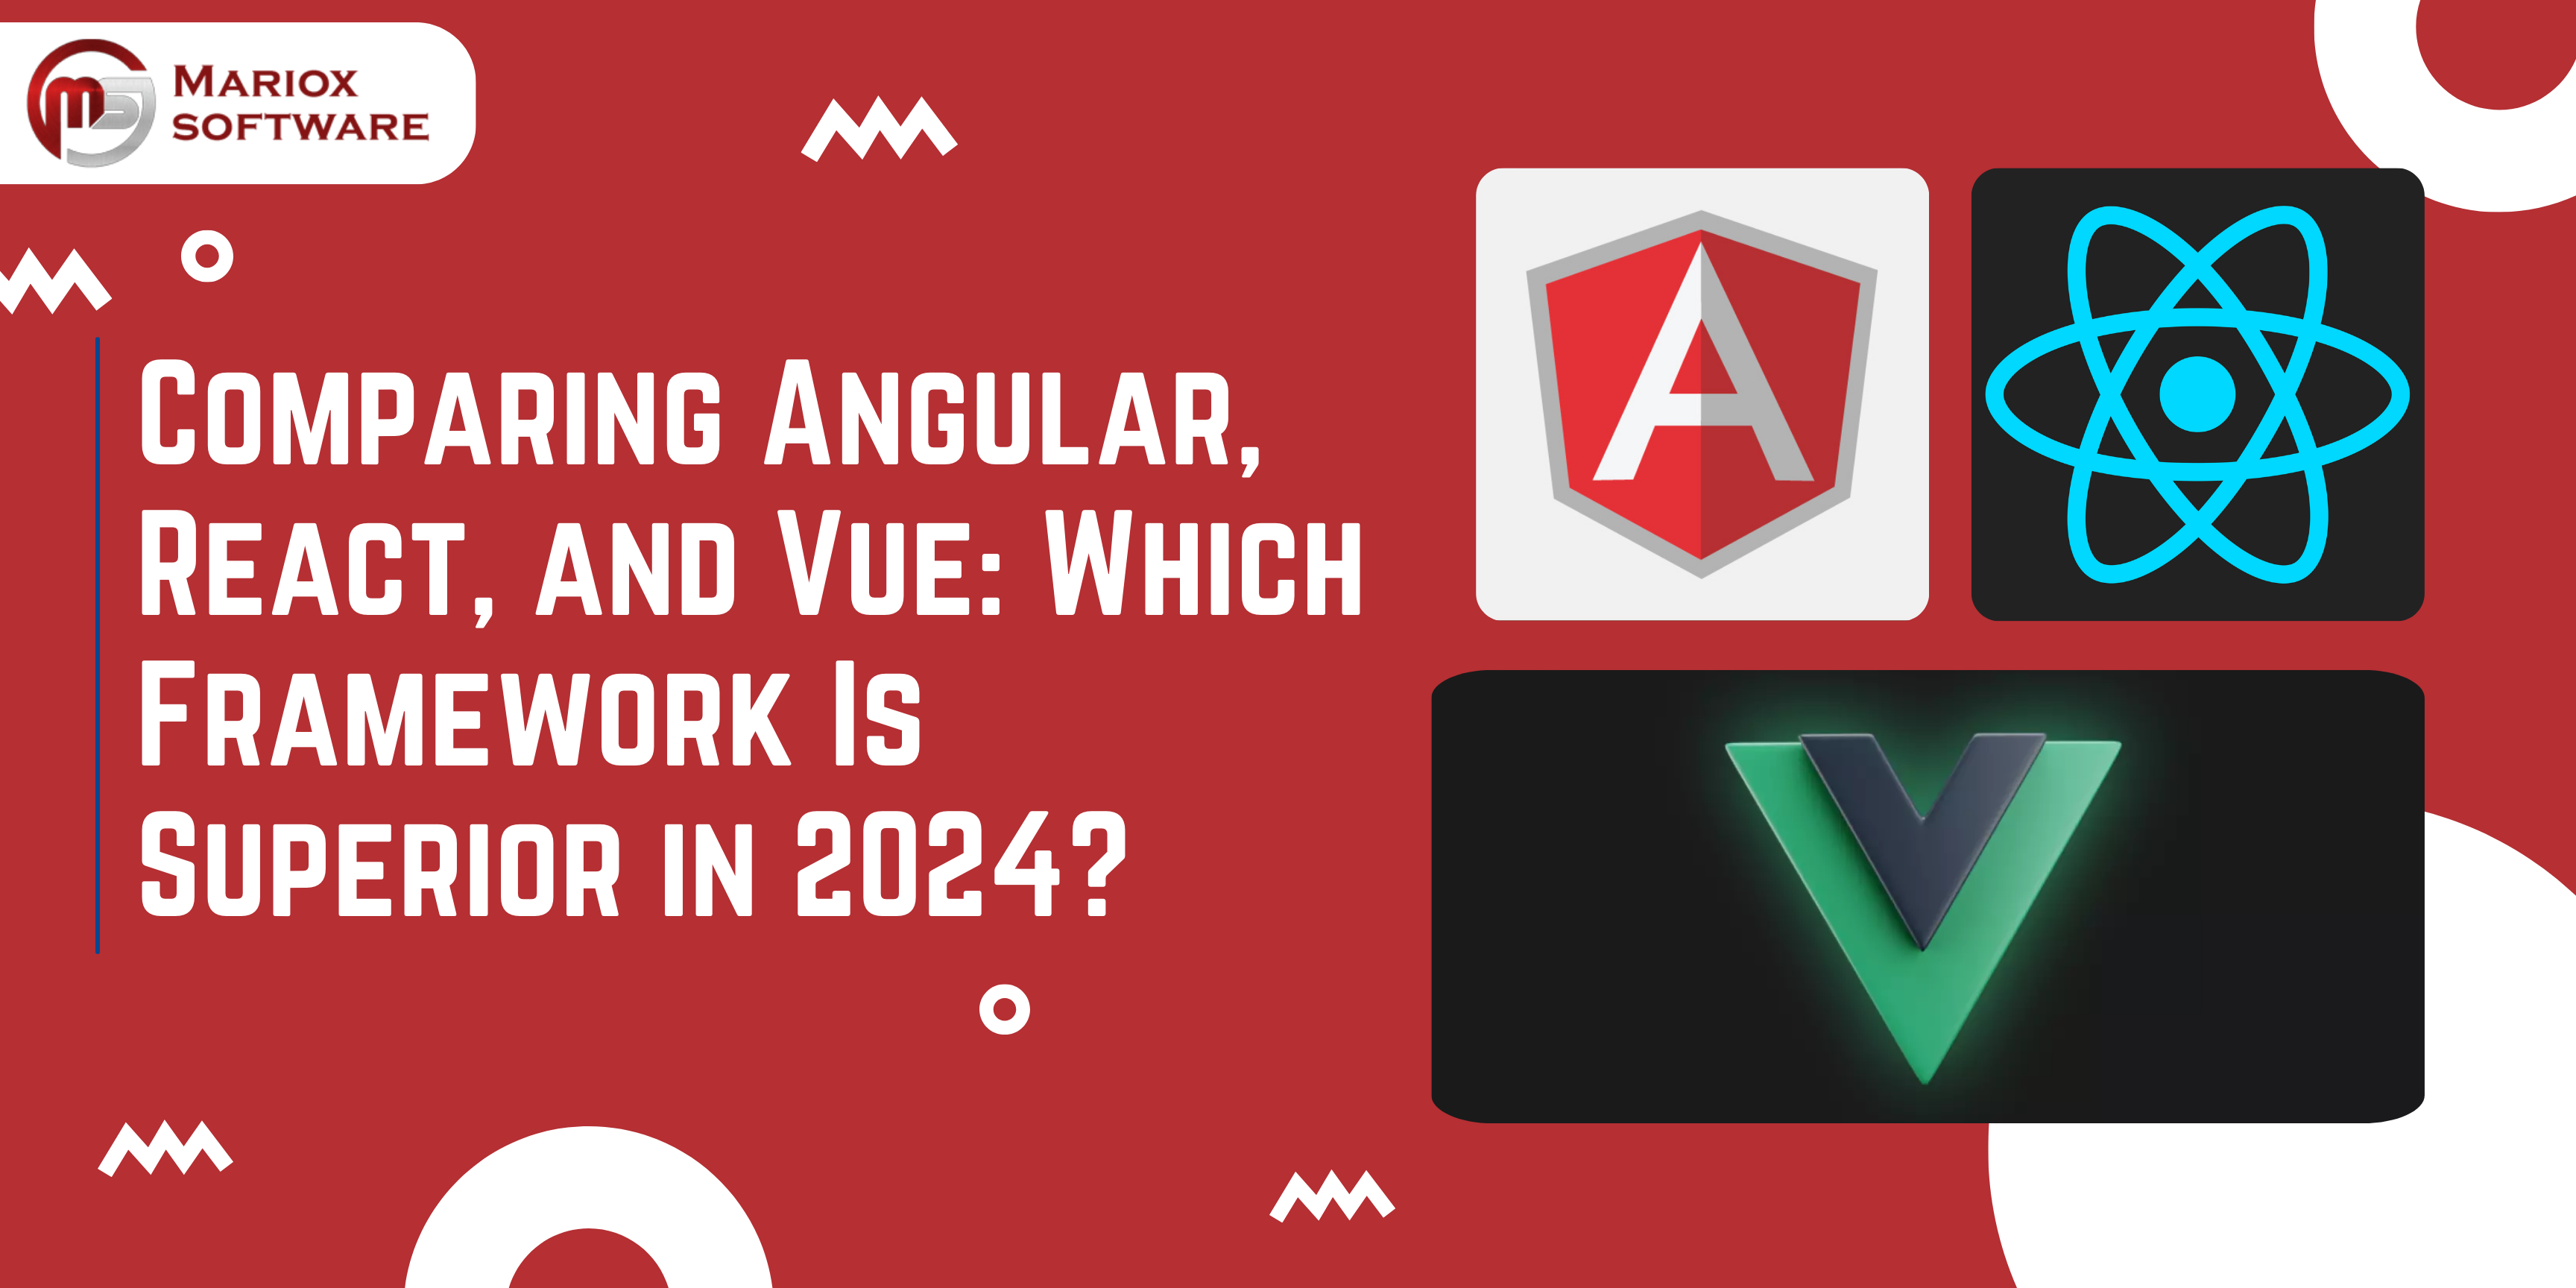 Comparing Angular, React, and Vue: Which Framework Is Superior in 2024